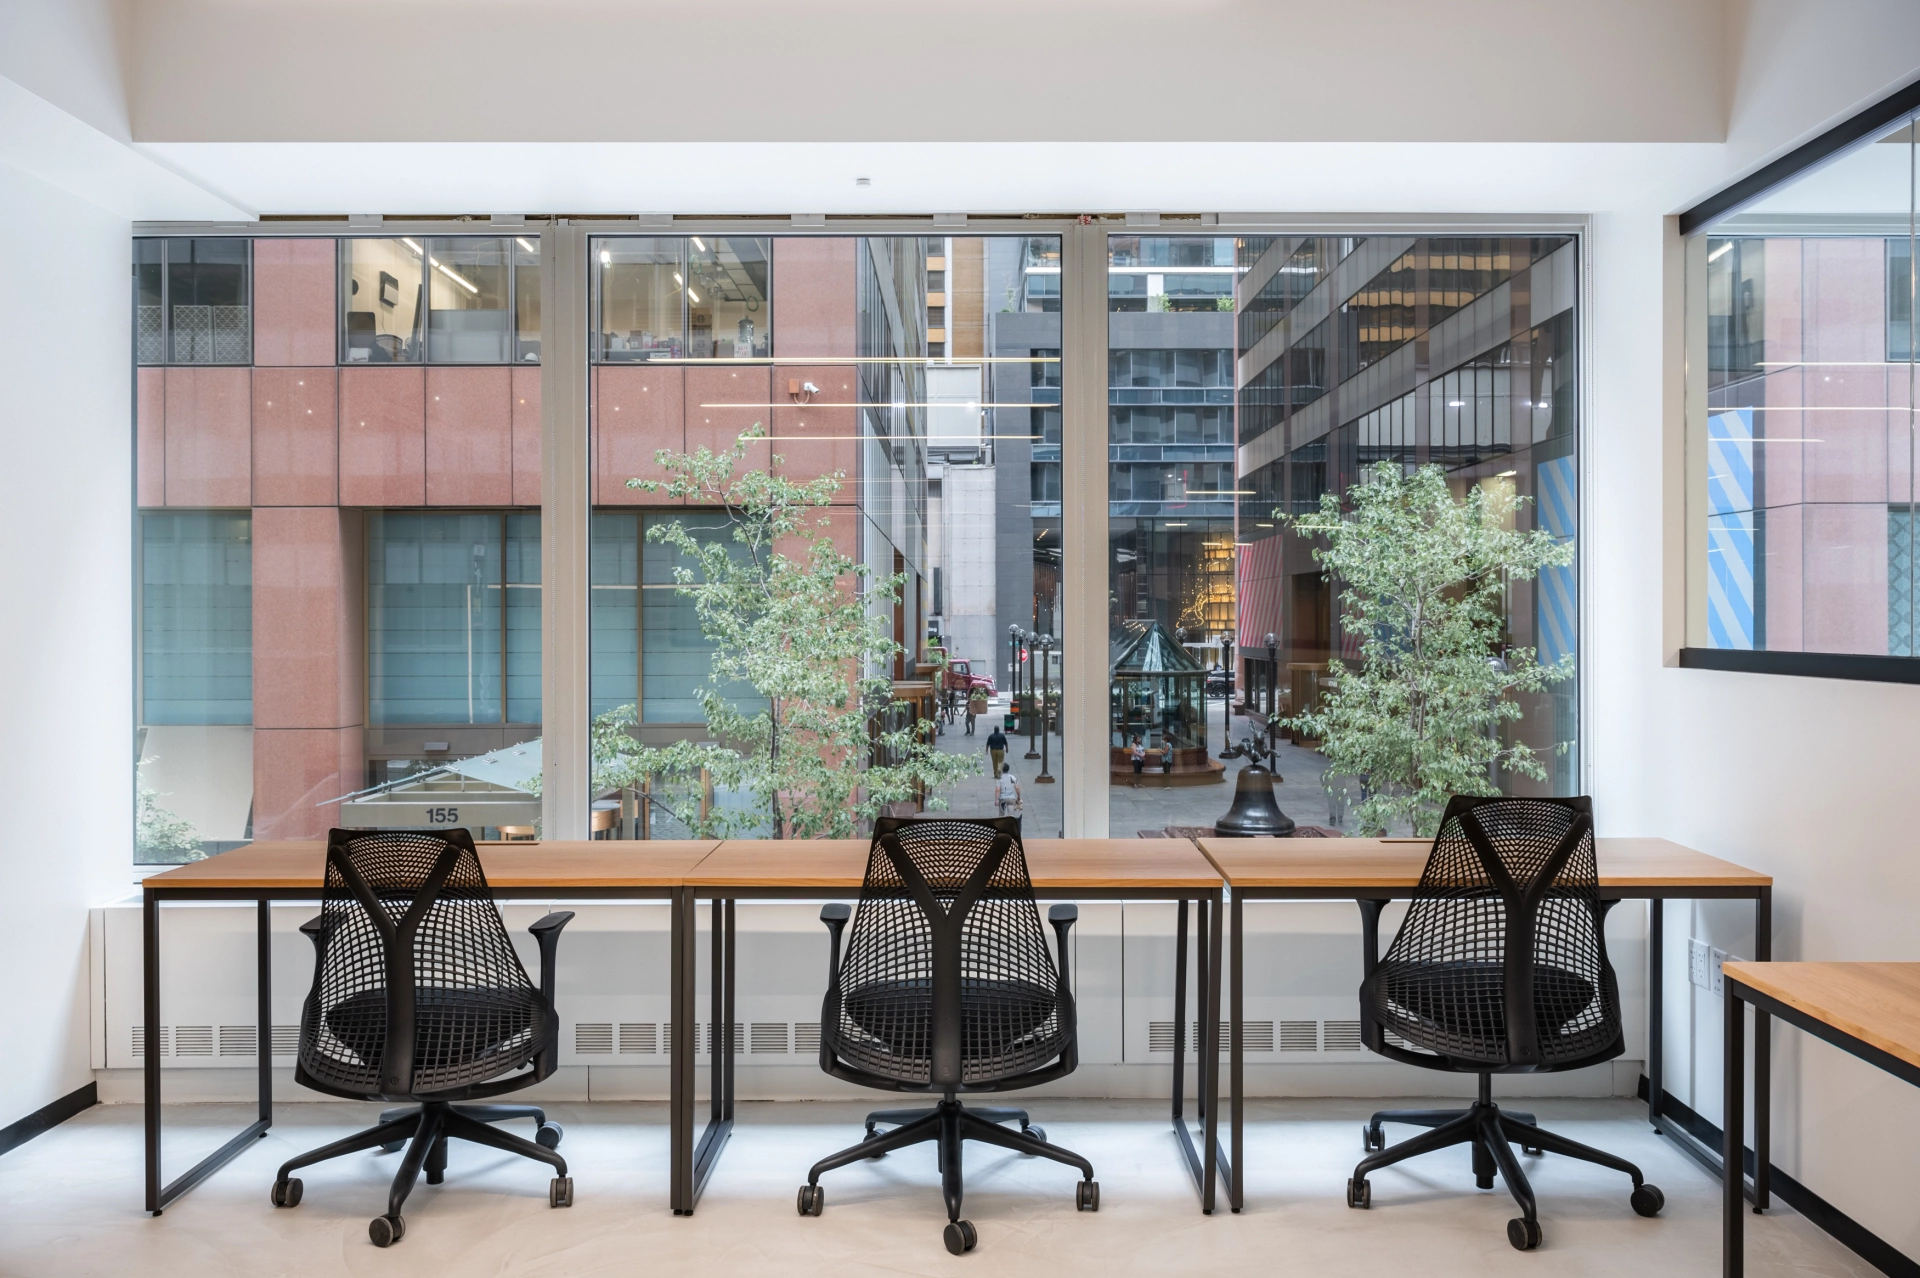 An office with desks and chairs overlooking New York City.